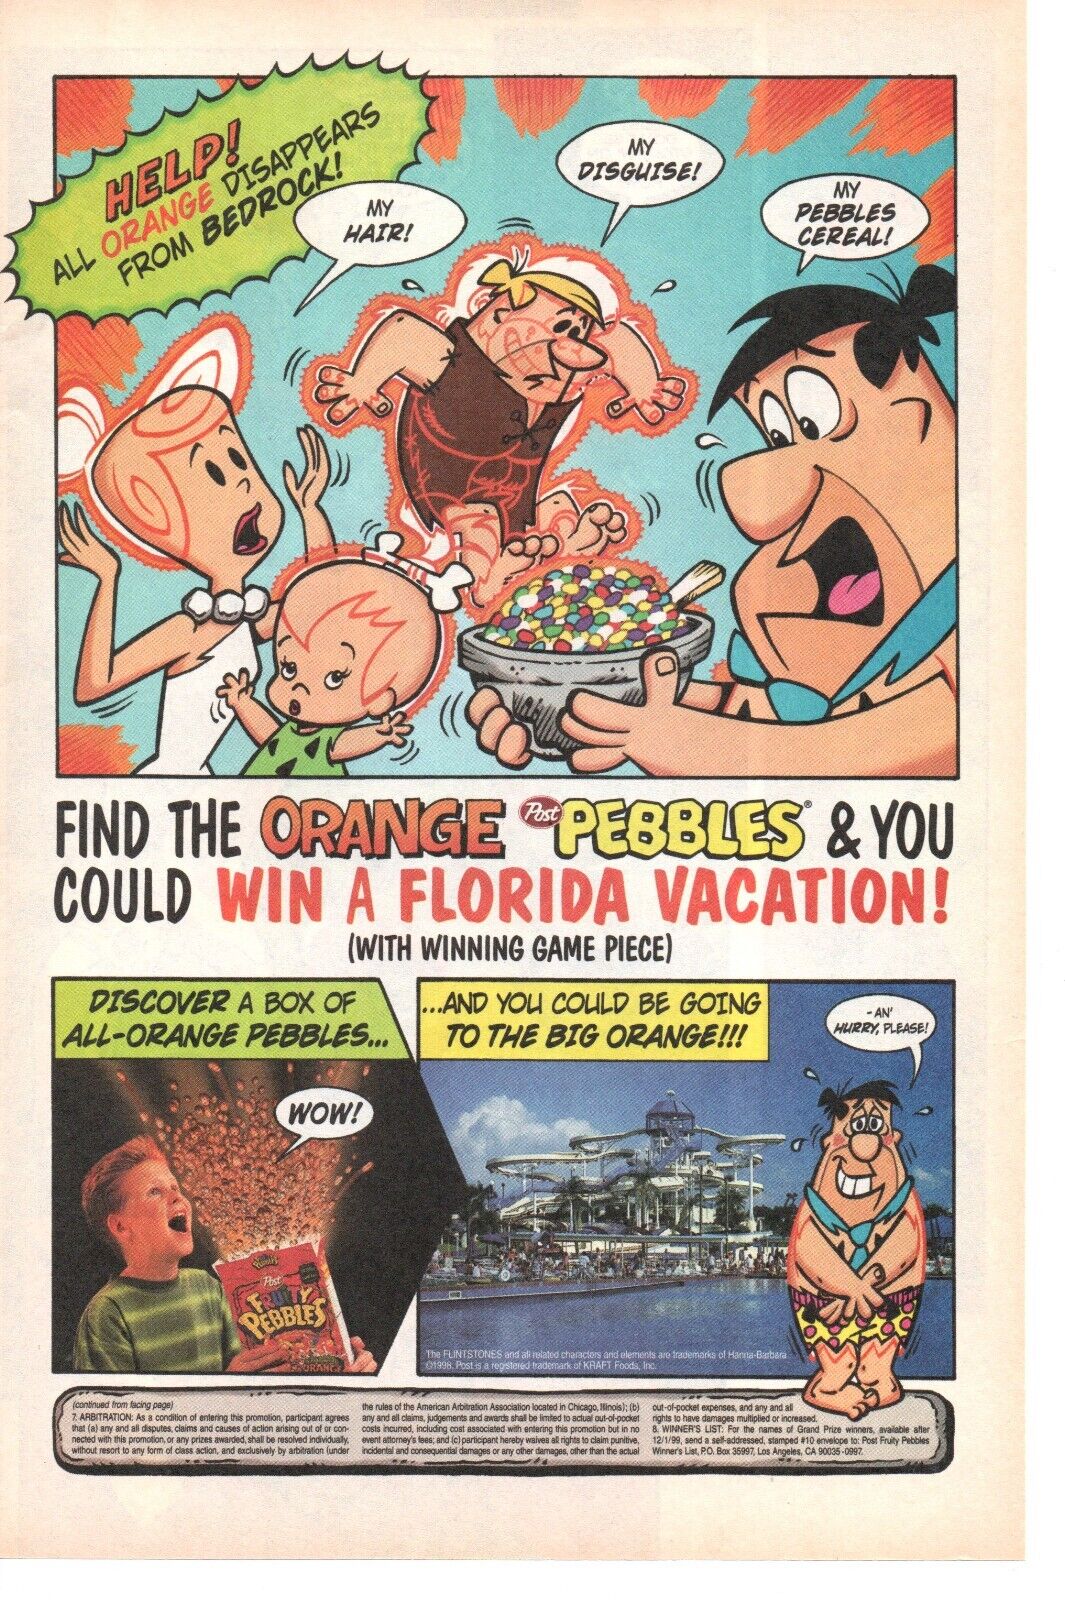 1998 FLINTSTONES Fruity Pebbles Cereal Contest Promo PRINT AD WALL ART - FRED